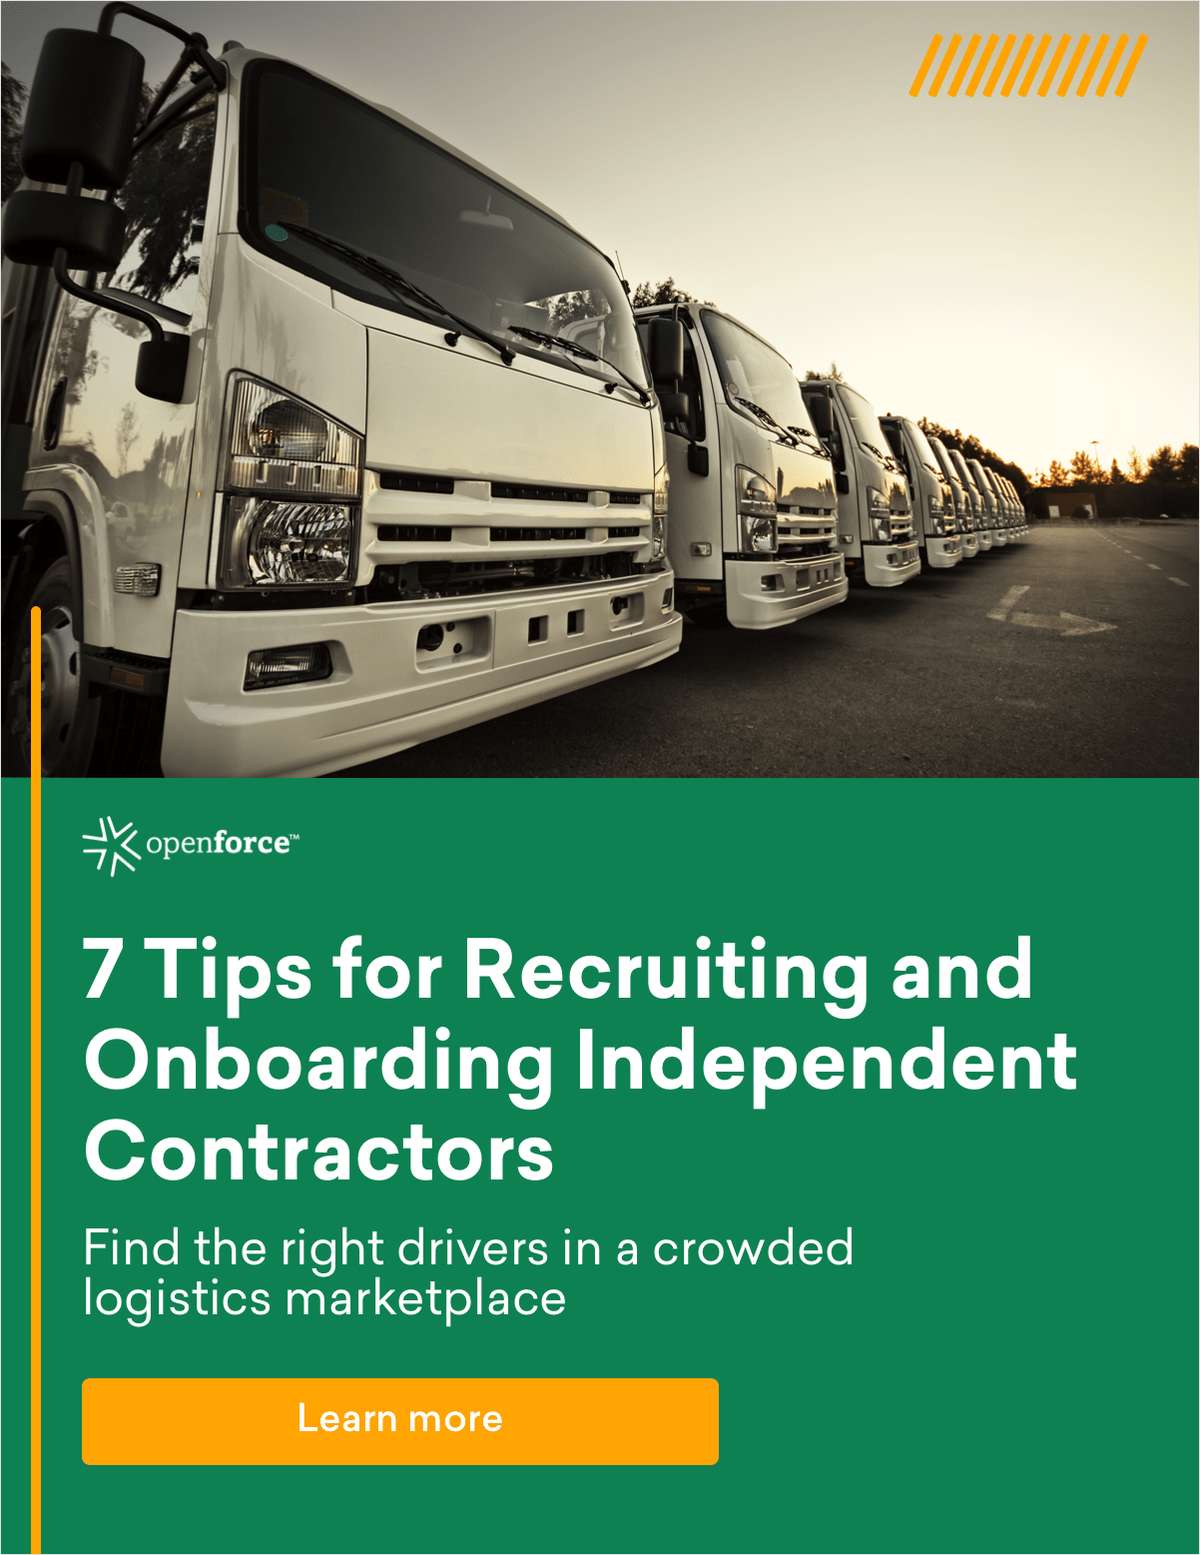 7 Tips for Recruiting and Onboarding Independent Contractors